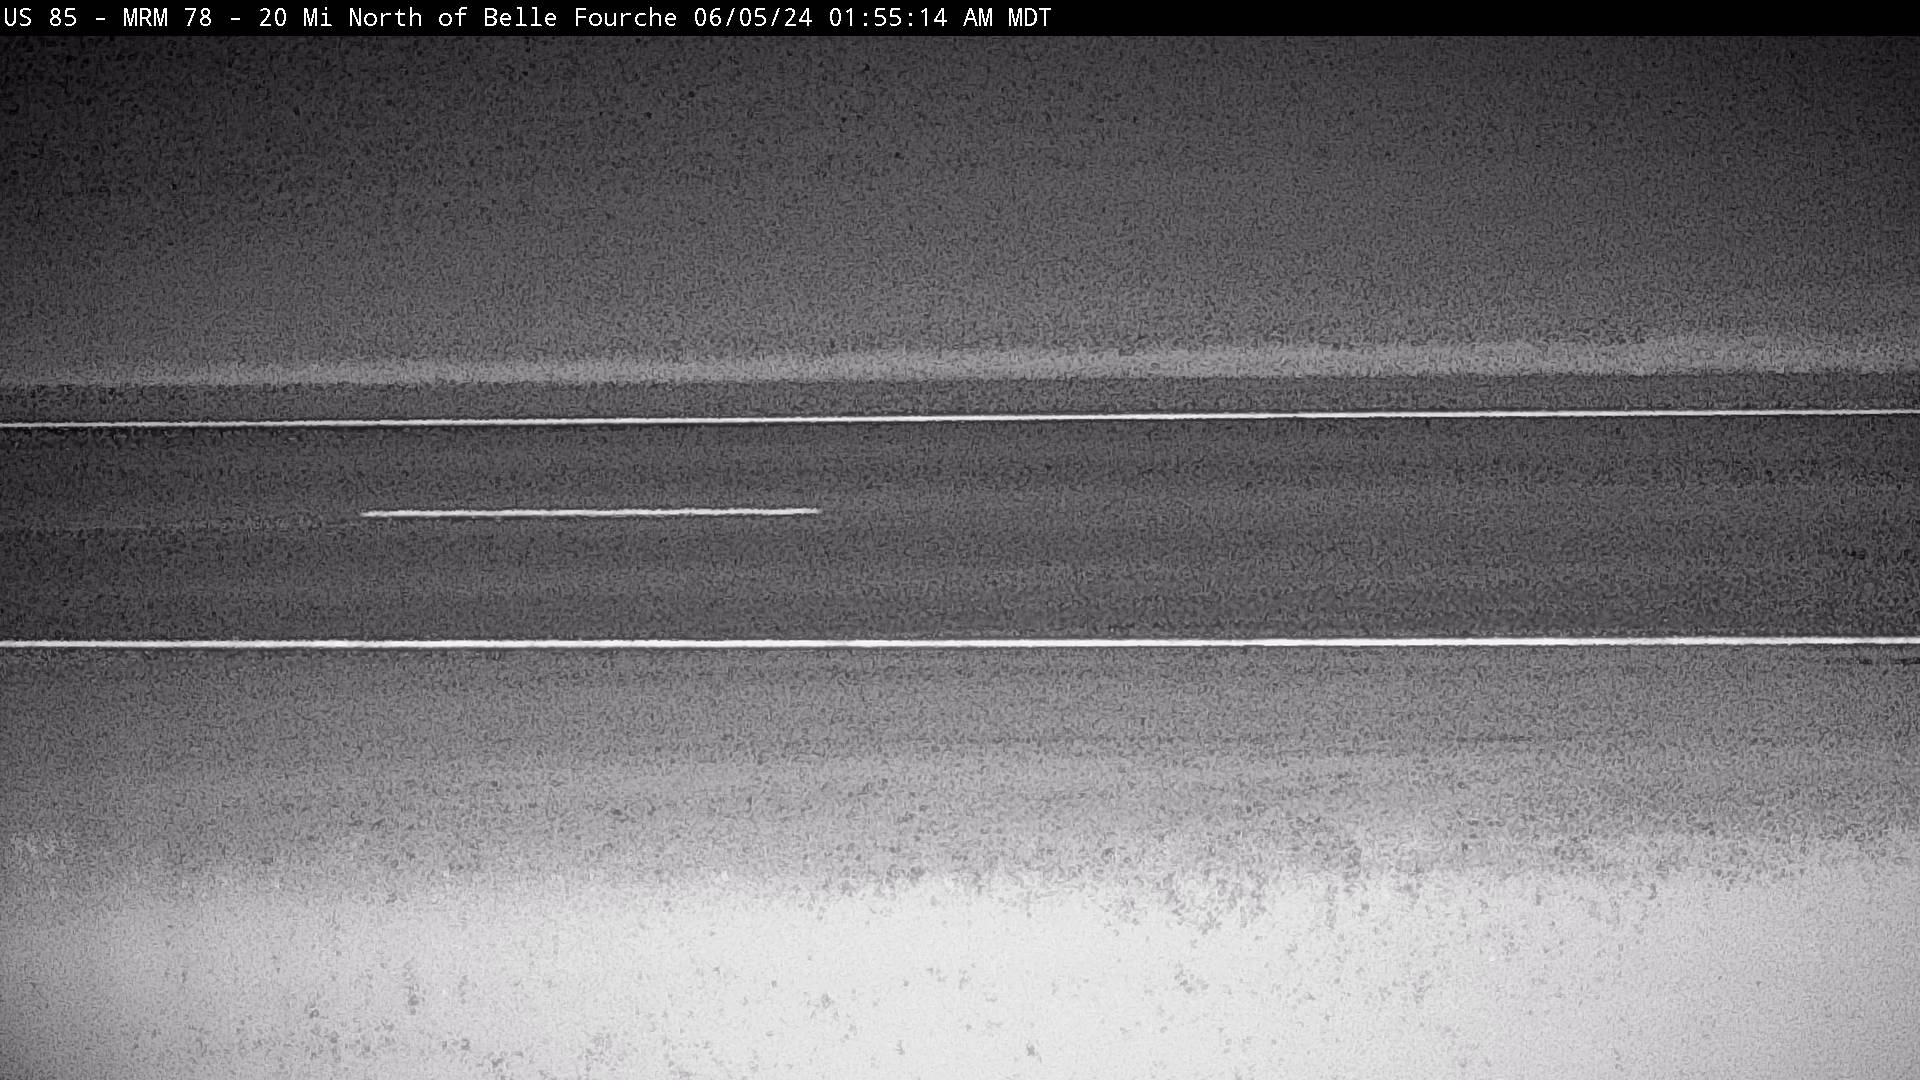 Traffic Cam 20 miles north of Belle Fourche along US-85 @ MP 78 - Northwest Player